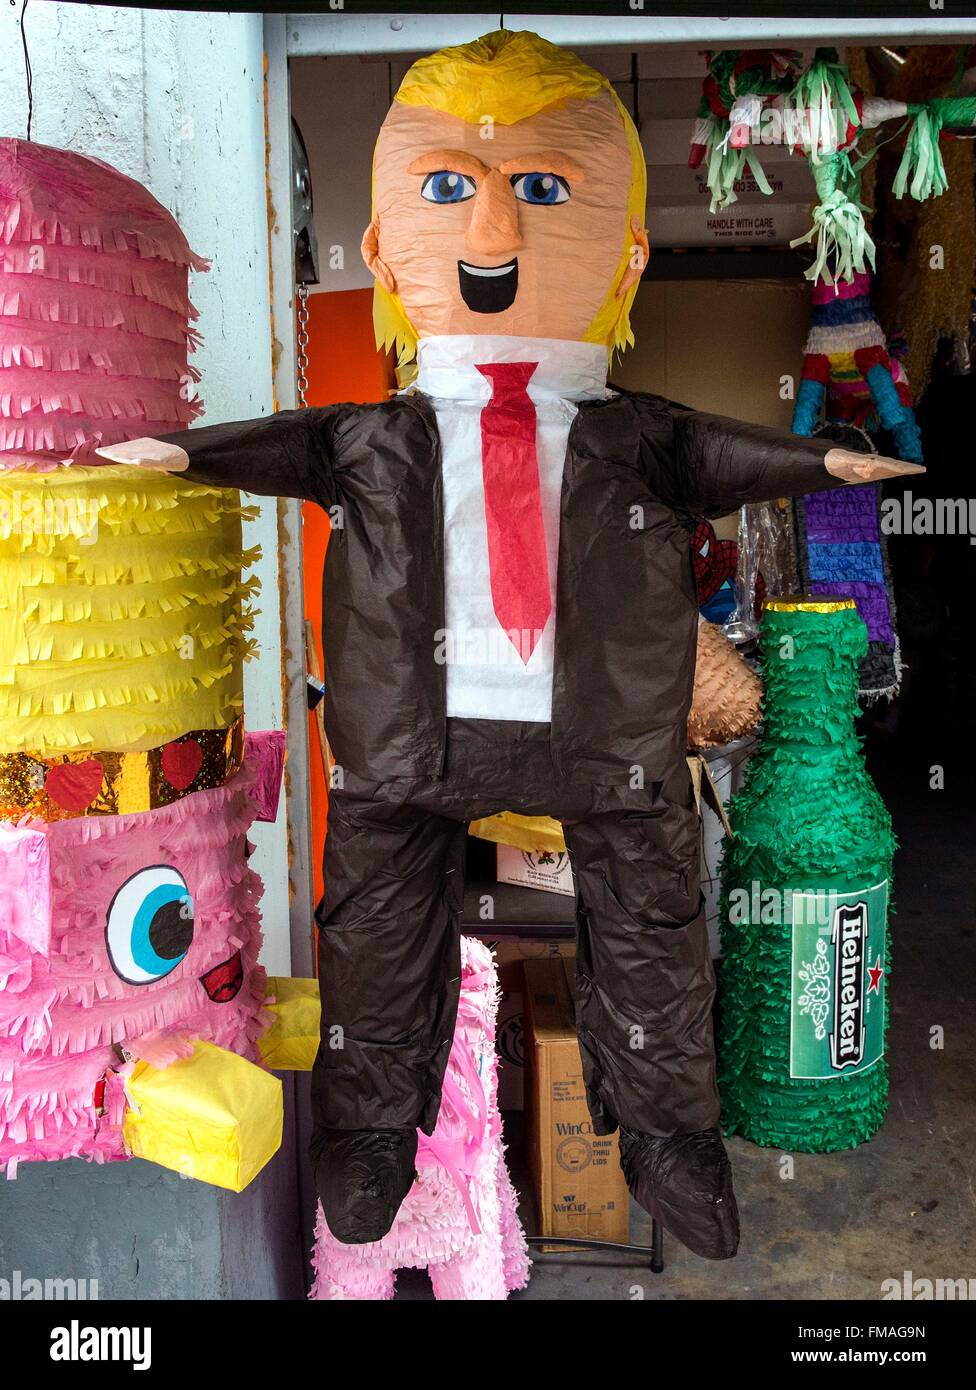 Los Angeles, California, USA. 11th Mar, 2016. A DONALD TRUMP pinata, a best  seller in the Hispanic community, is displayed in the Pinata District on  Olympic Blvd. in downtown Los Angeles. ©